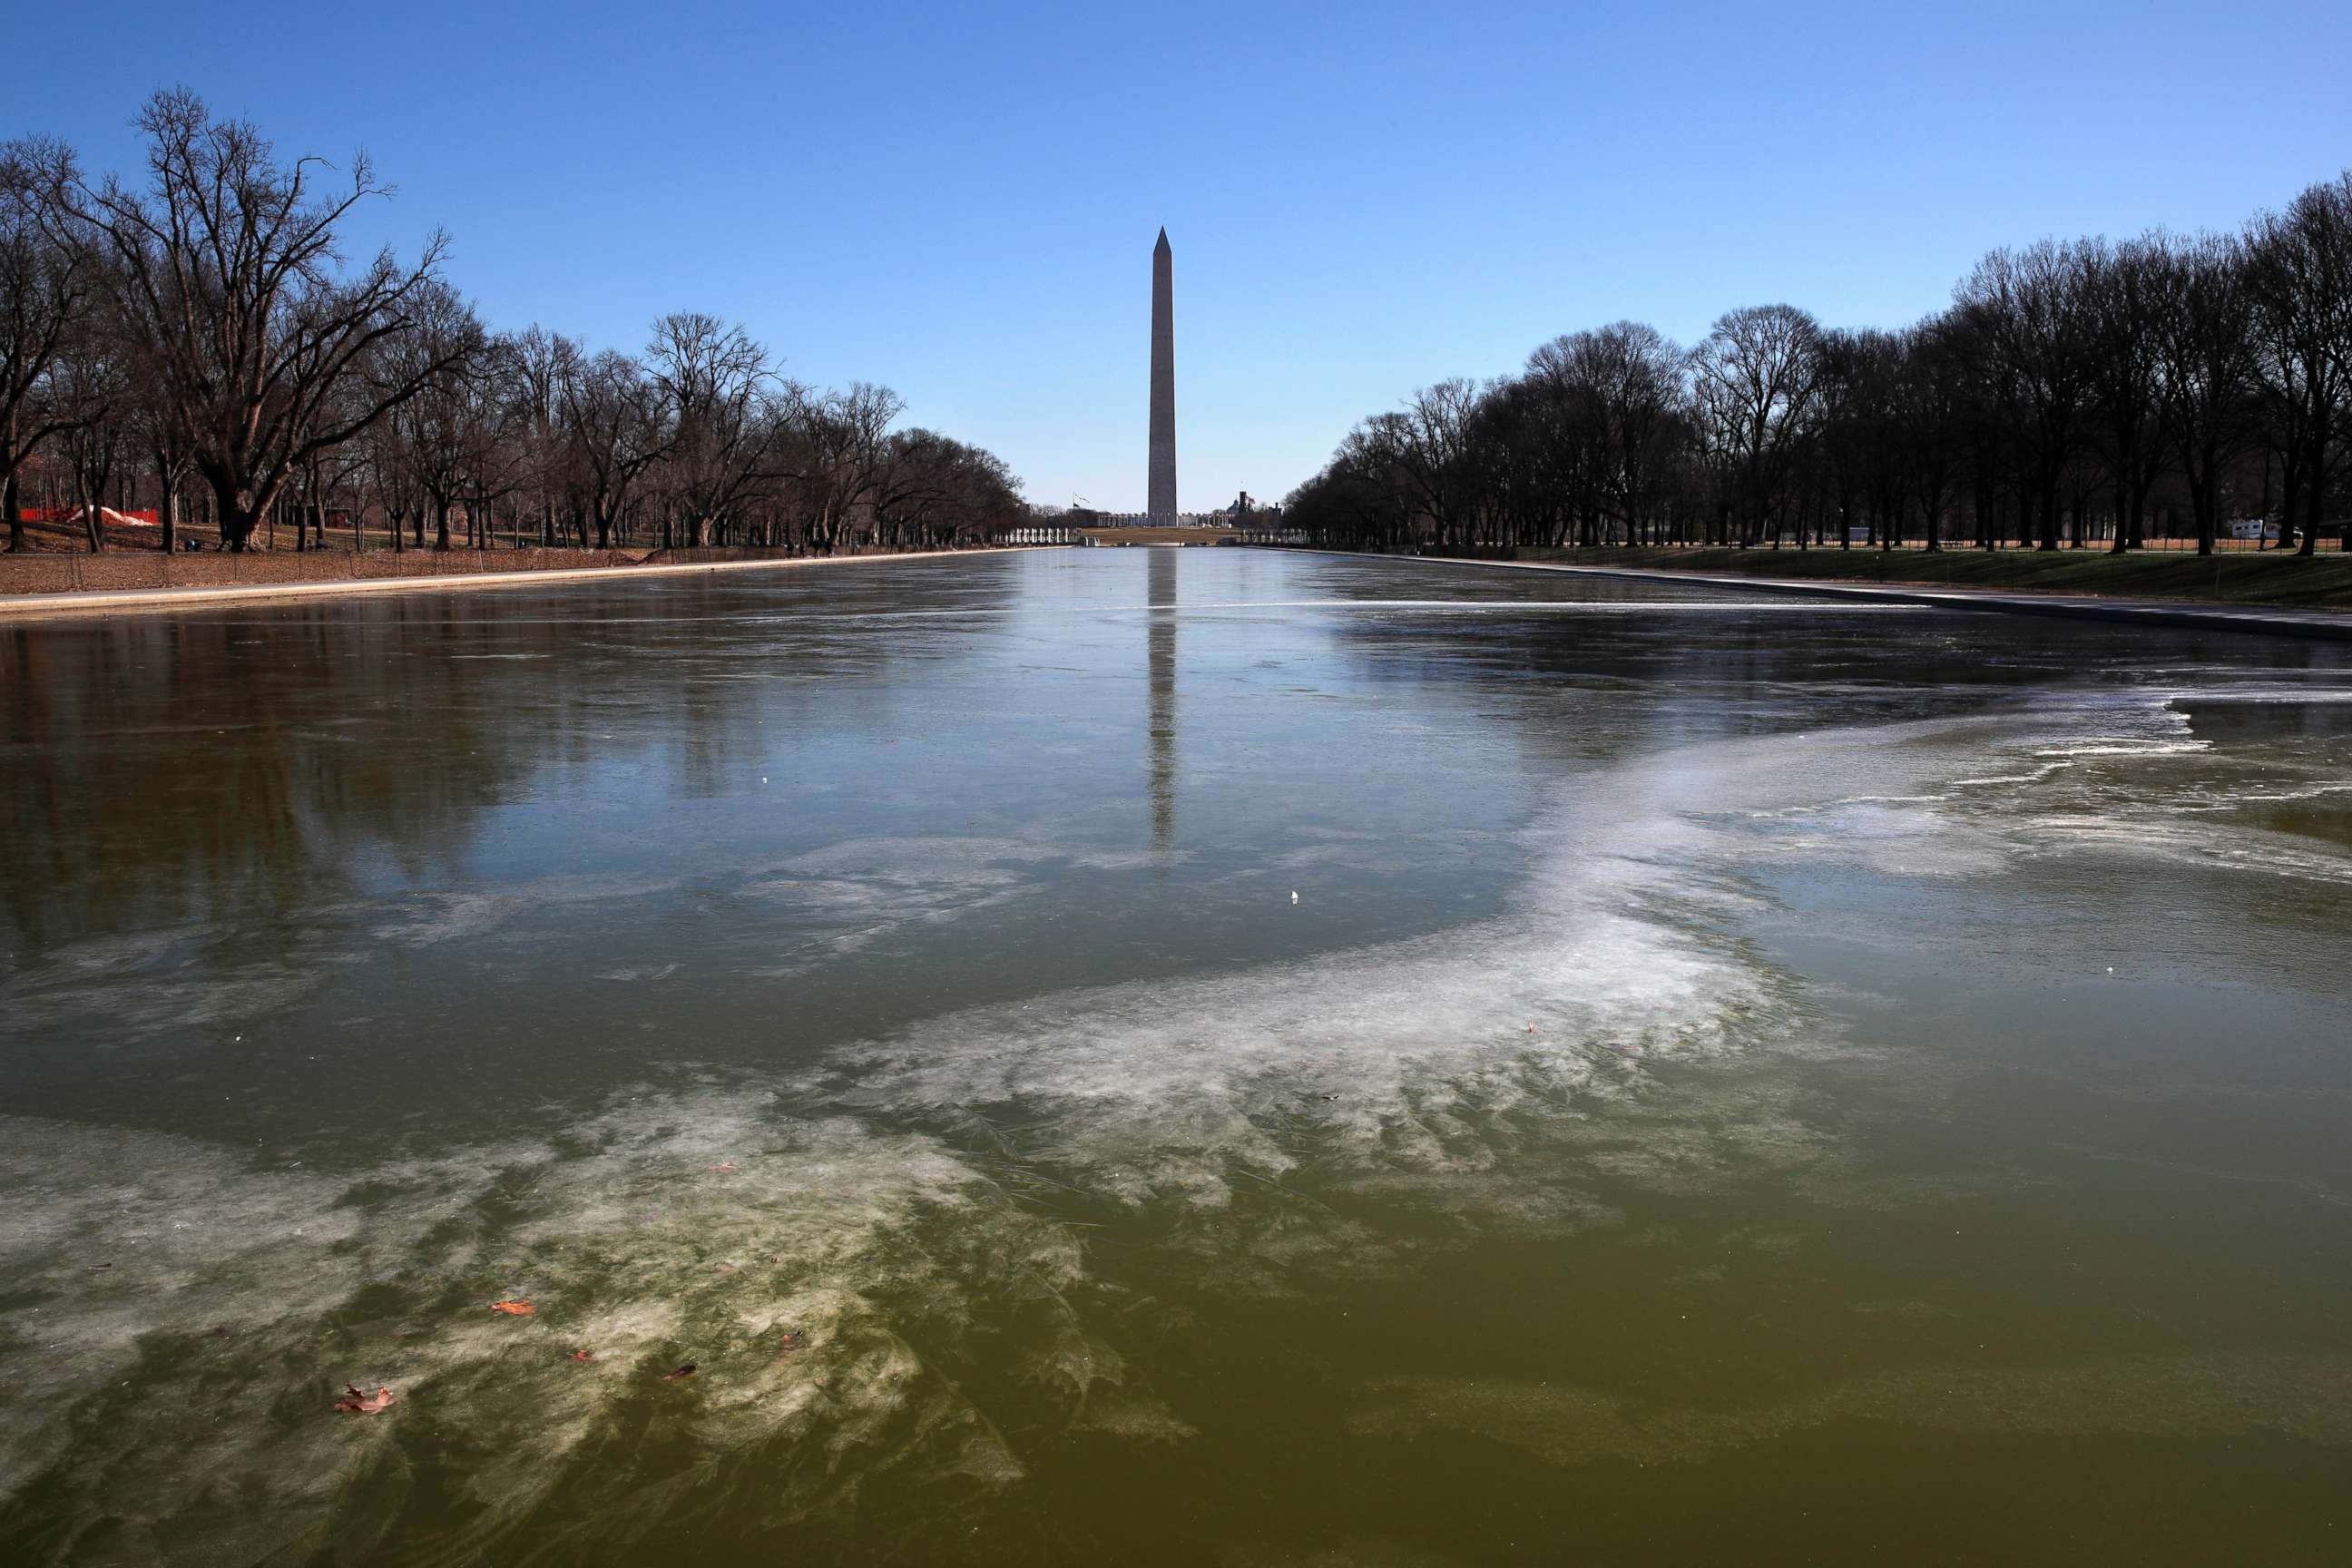 PHOTO: With the Washington Monument in the background, the reflecting pool by the Lincoln Memorial begins to turn to ice during frigid temperatures on the National Mall, Jan. 21, 2019, in Washington D.C.